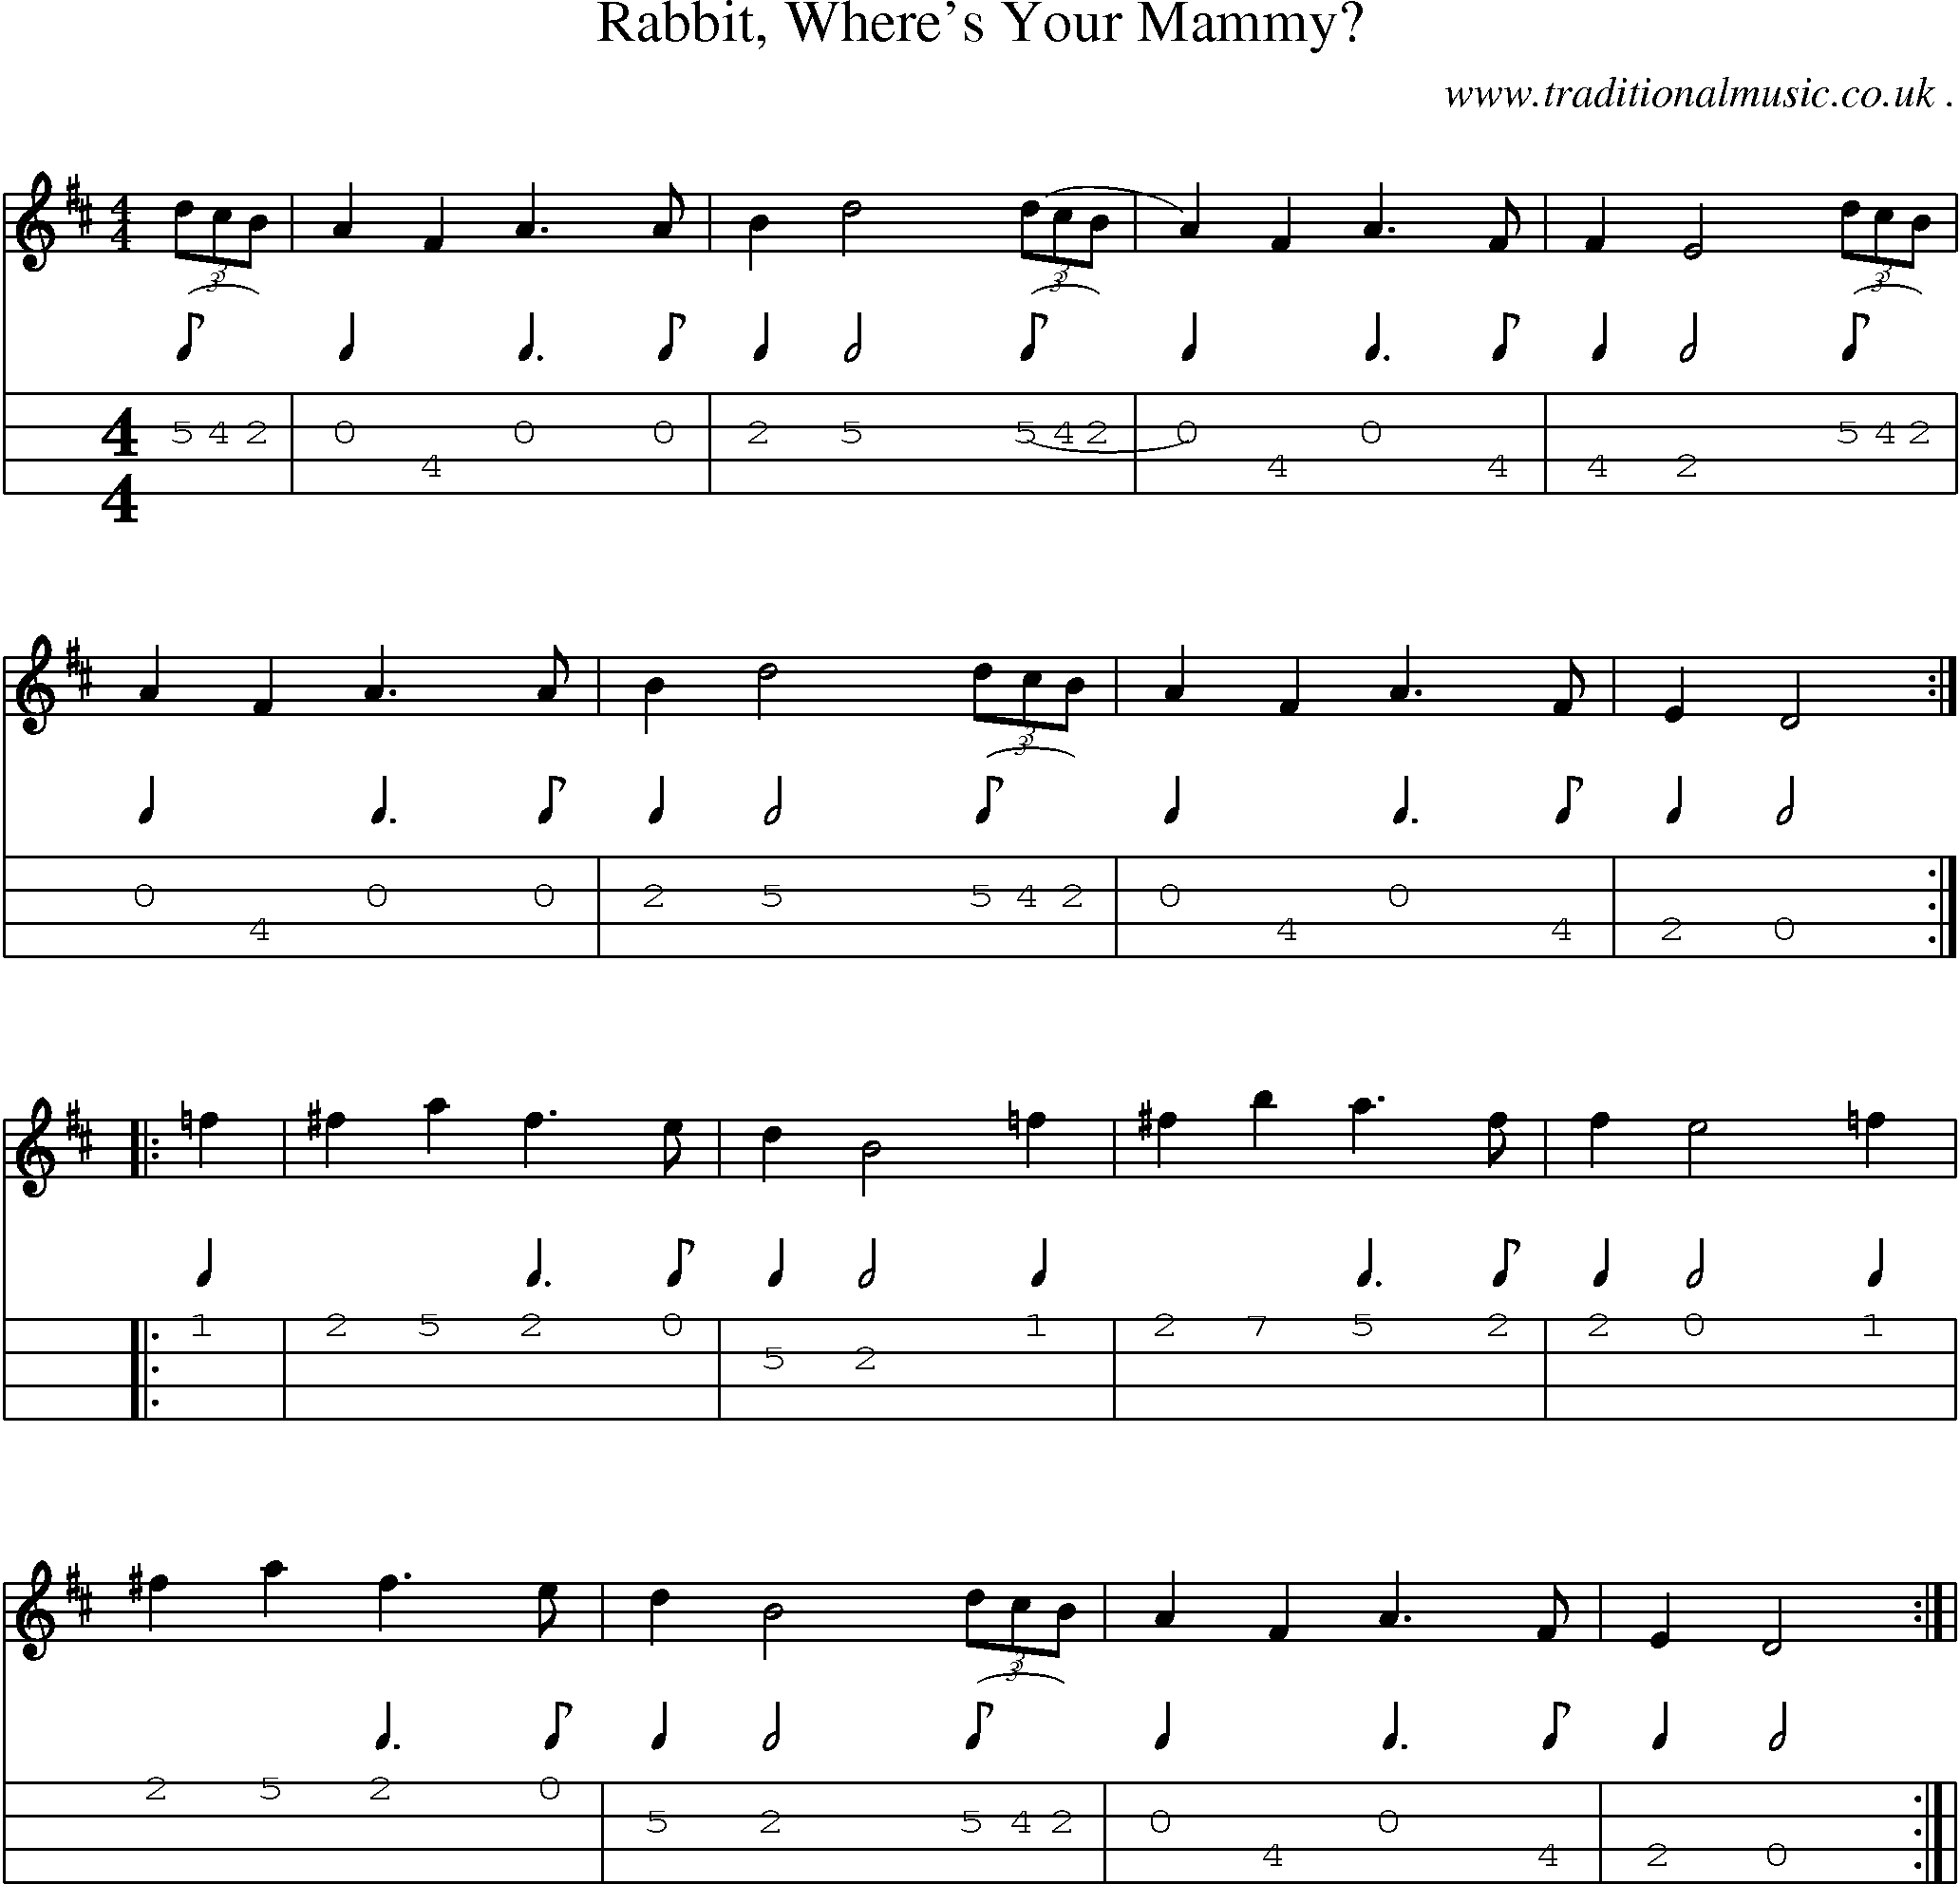 Music Score and Guitar Tabs for Rabbit Wheres Your Mammy